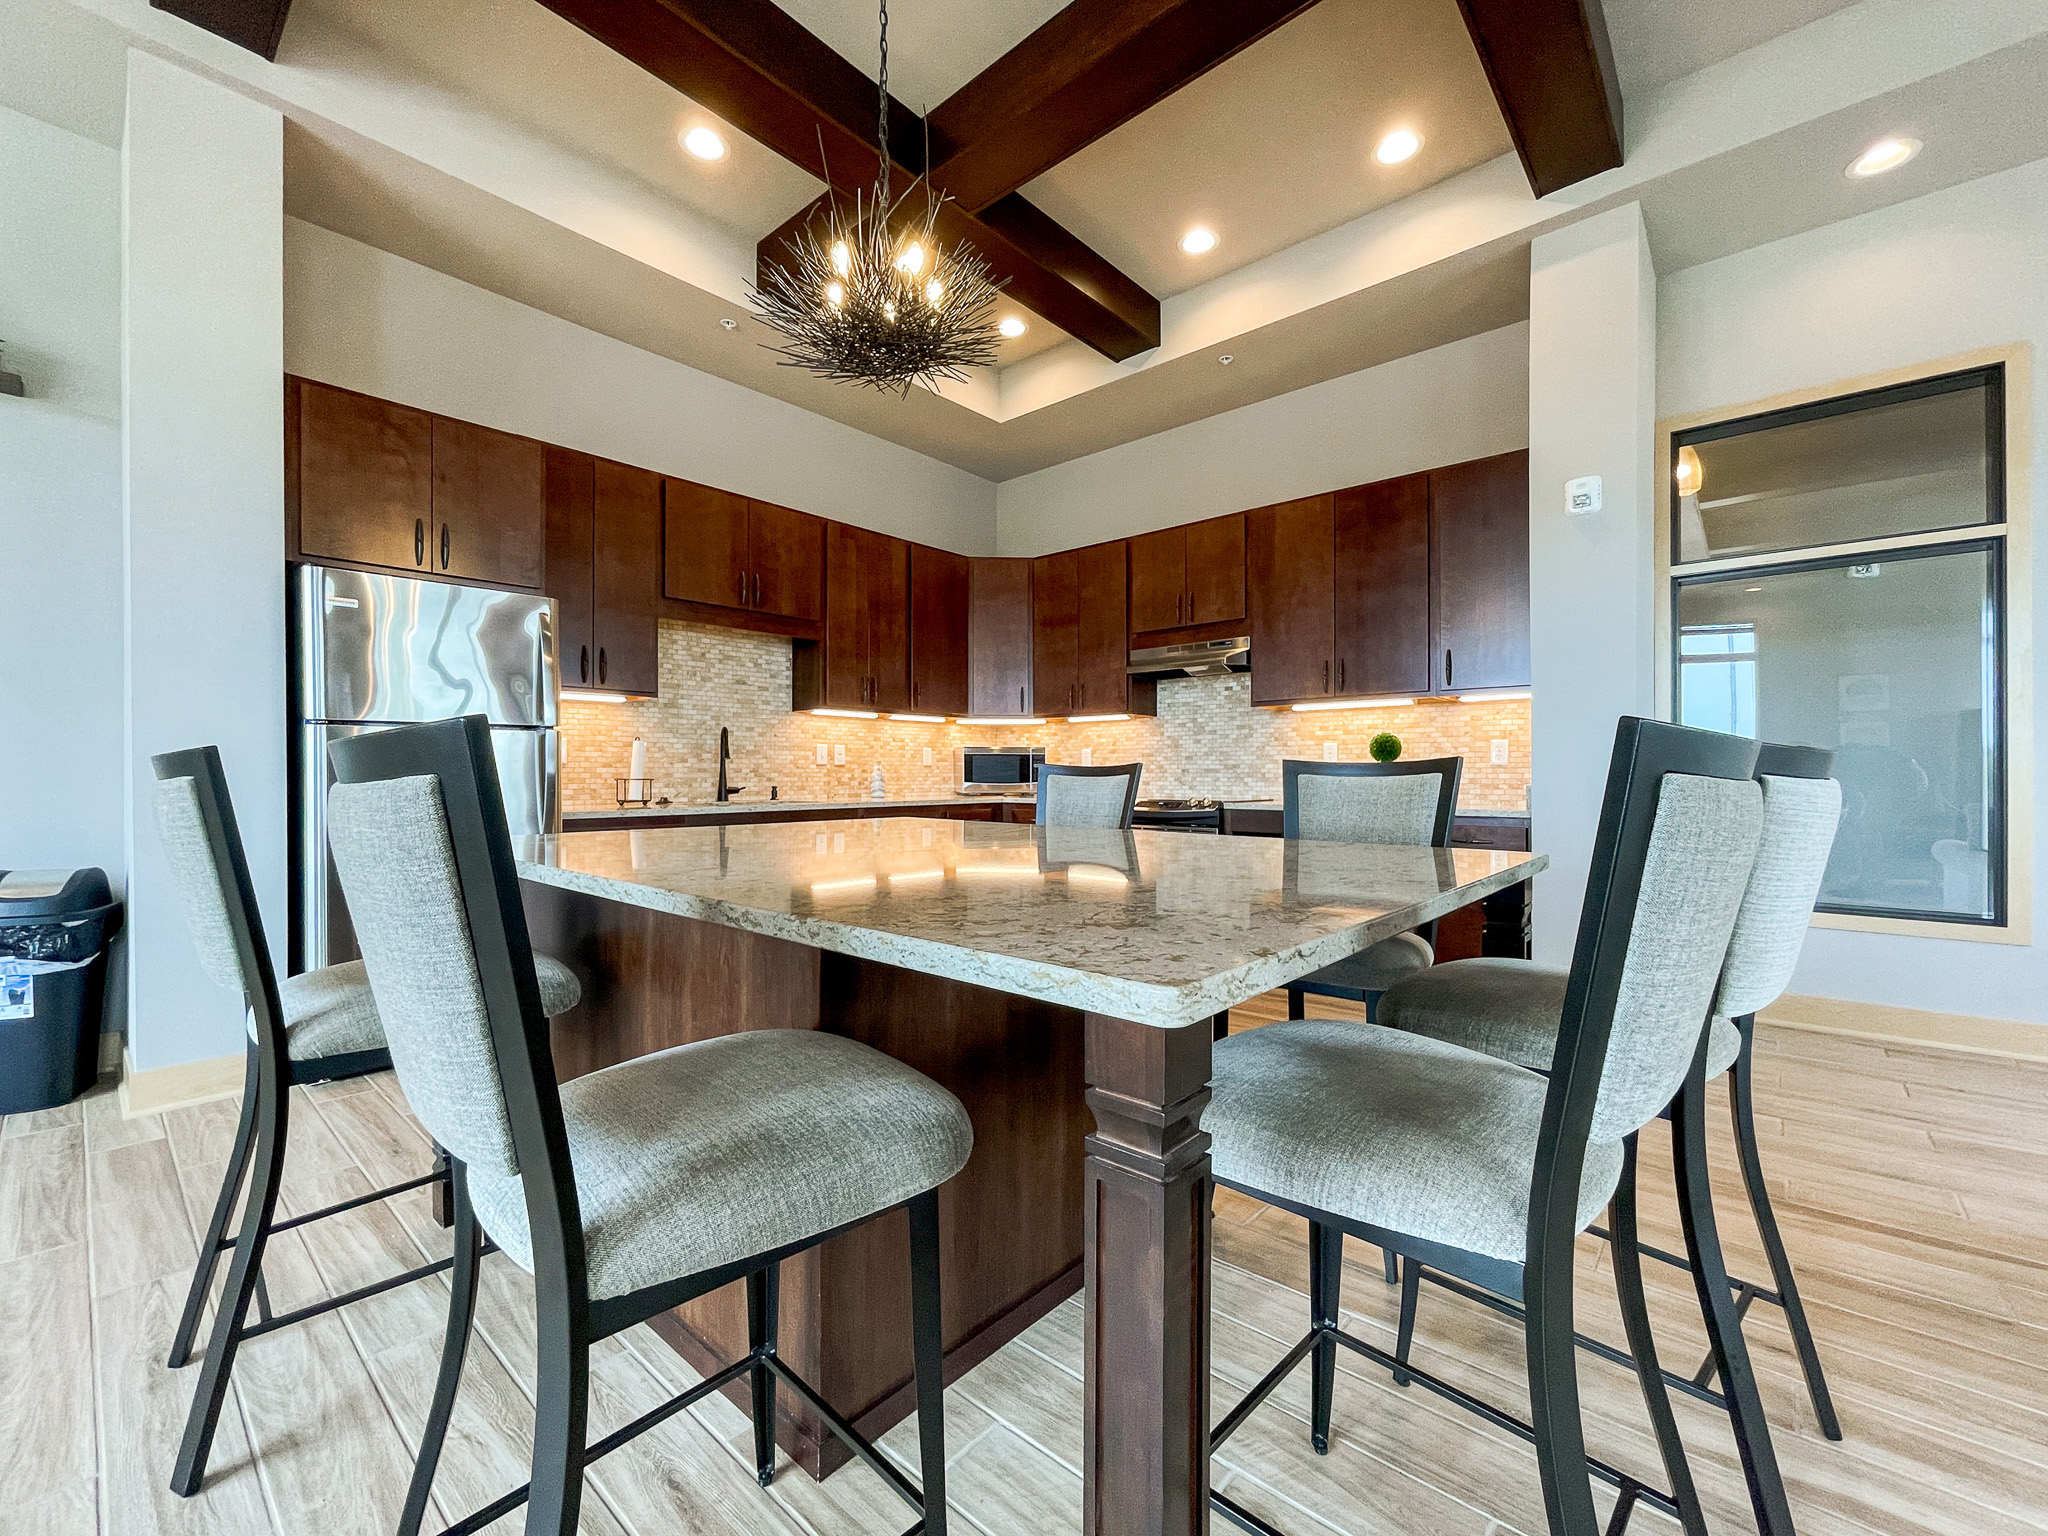 An apartment clubhouse kitchen area with an island surrounded by chairs in the center